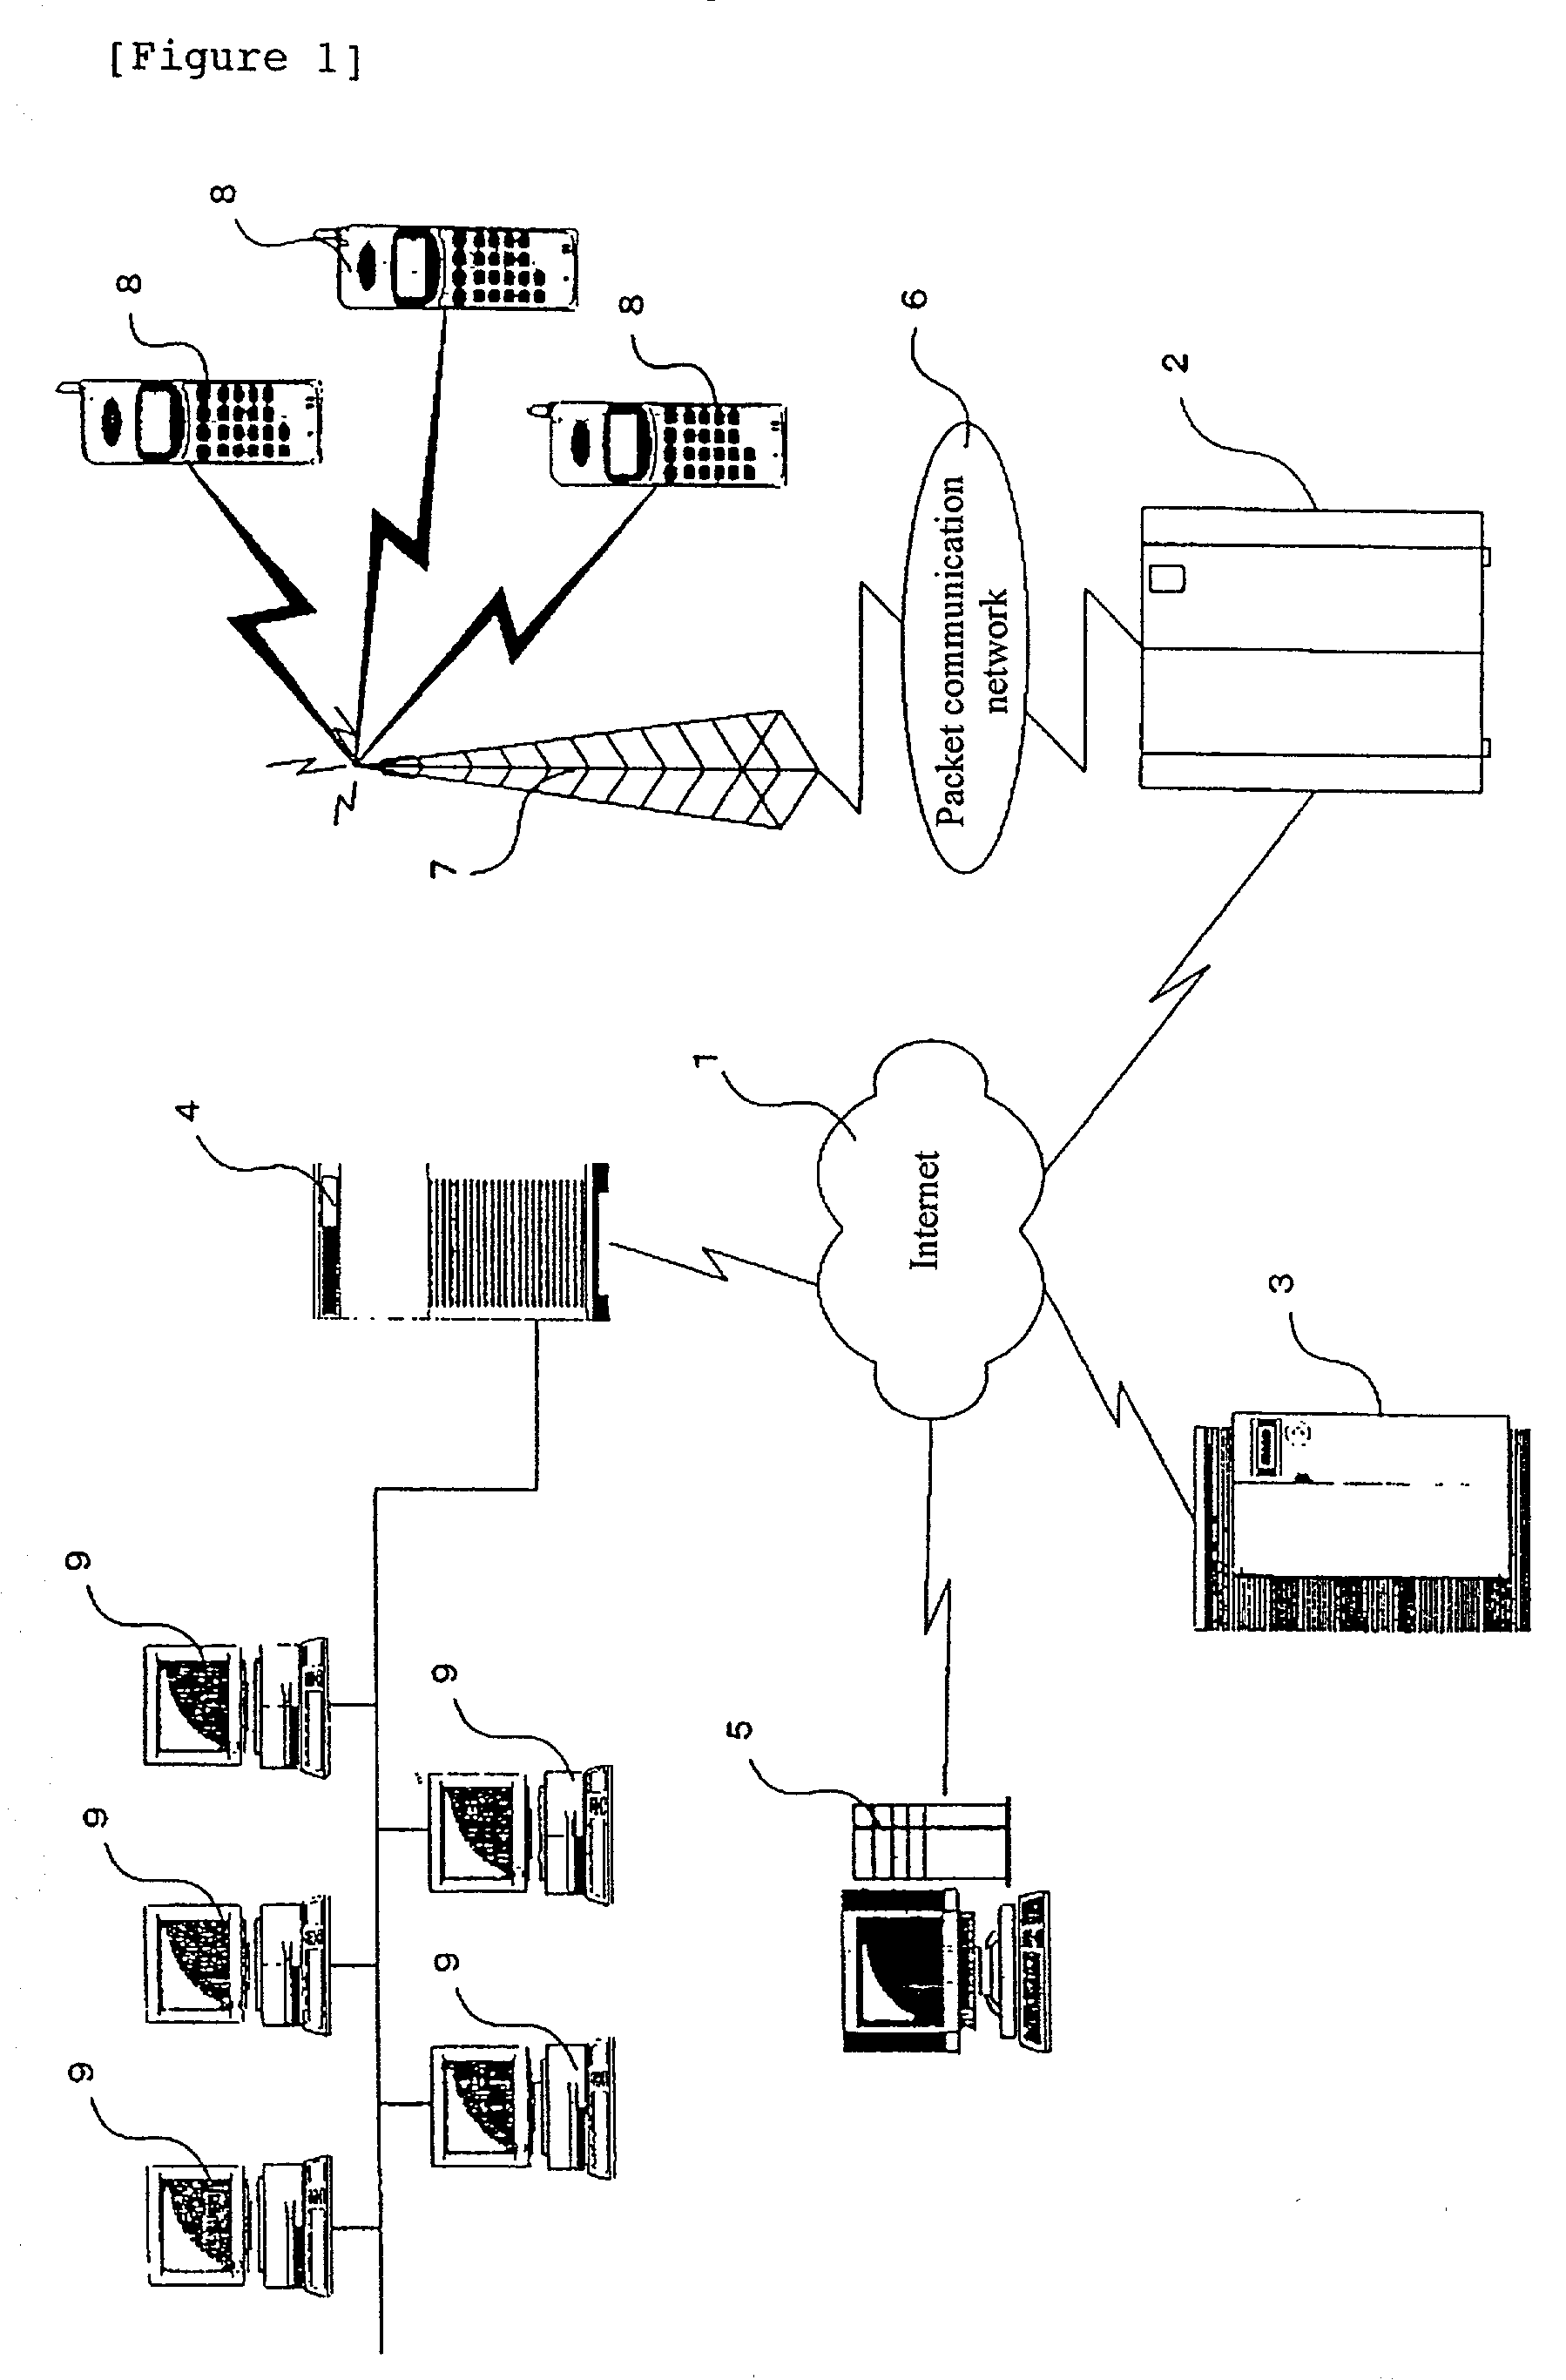 Computer network system, computer system, method for communication between computer systems, method for measuring computer system performance, and storage medium